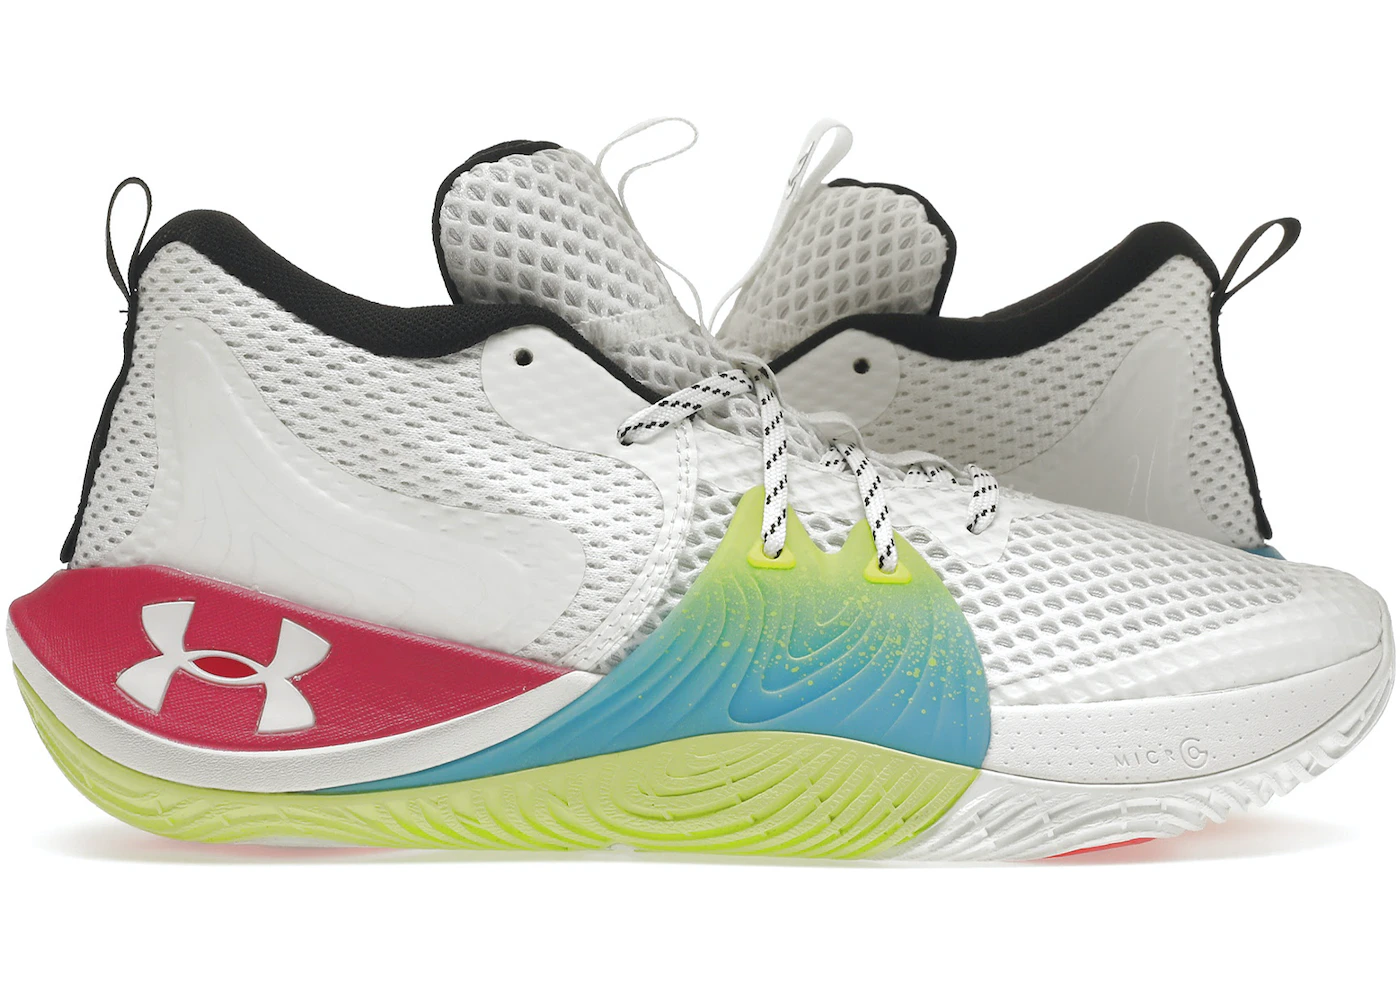 Under Armour Embiid One White Multicolor Men's - 3023086-103 - US